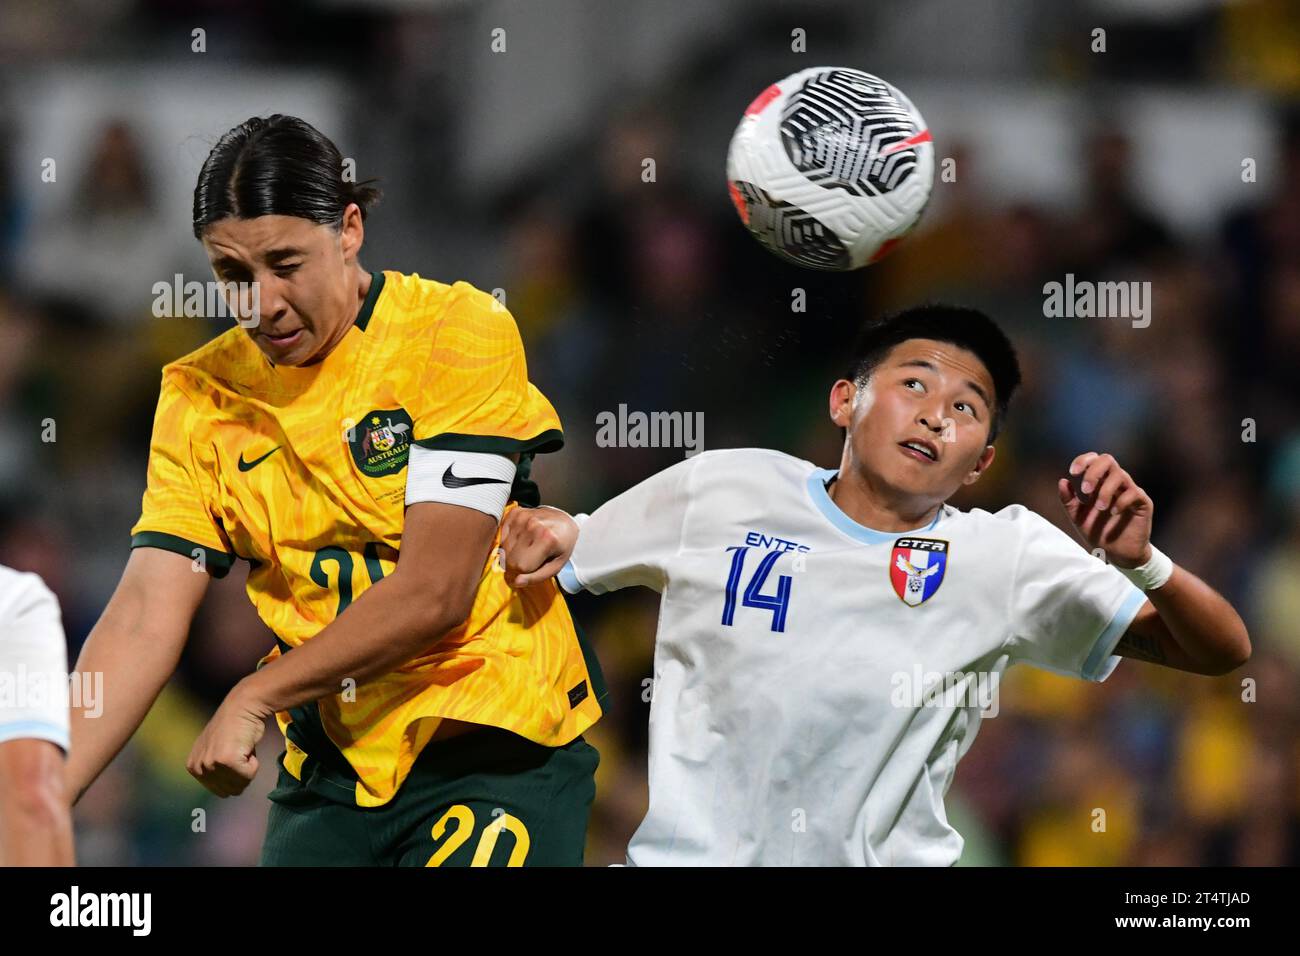 Perth, Australia. 01st Nov, 2023. Samantha May Kerr (L) of Australia women's football team and Wu Kai-Ching (R) of the Chinese Taipei women's football team are seen in action during the 2024 AFC Women's soccer Olympic Qualifying Round 2 Group A match between Australia and Chinese Taipei held at the Perth Rectangular Stadium. Final score Australia 3:0 Chinese Taipei. Credit: SOPA Images Limited/Alamy Live News Stock Photo